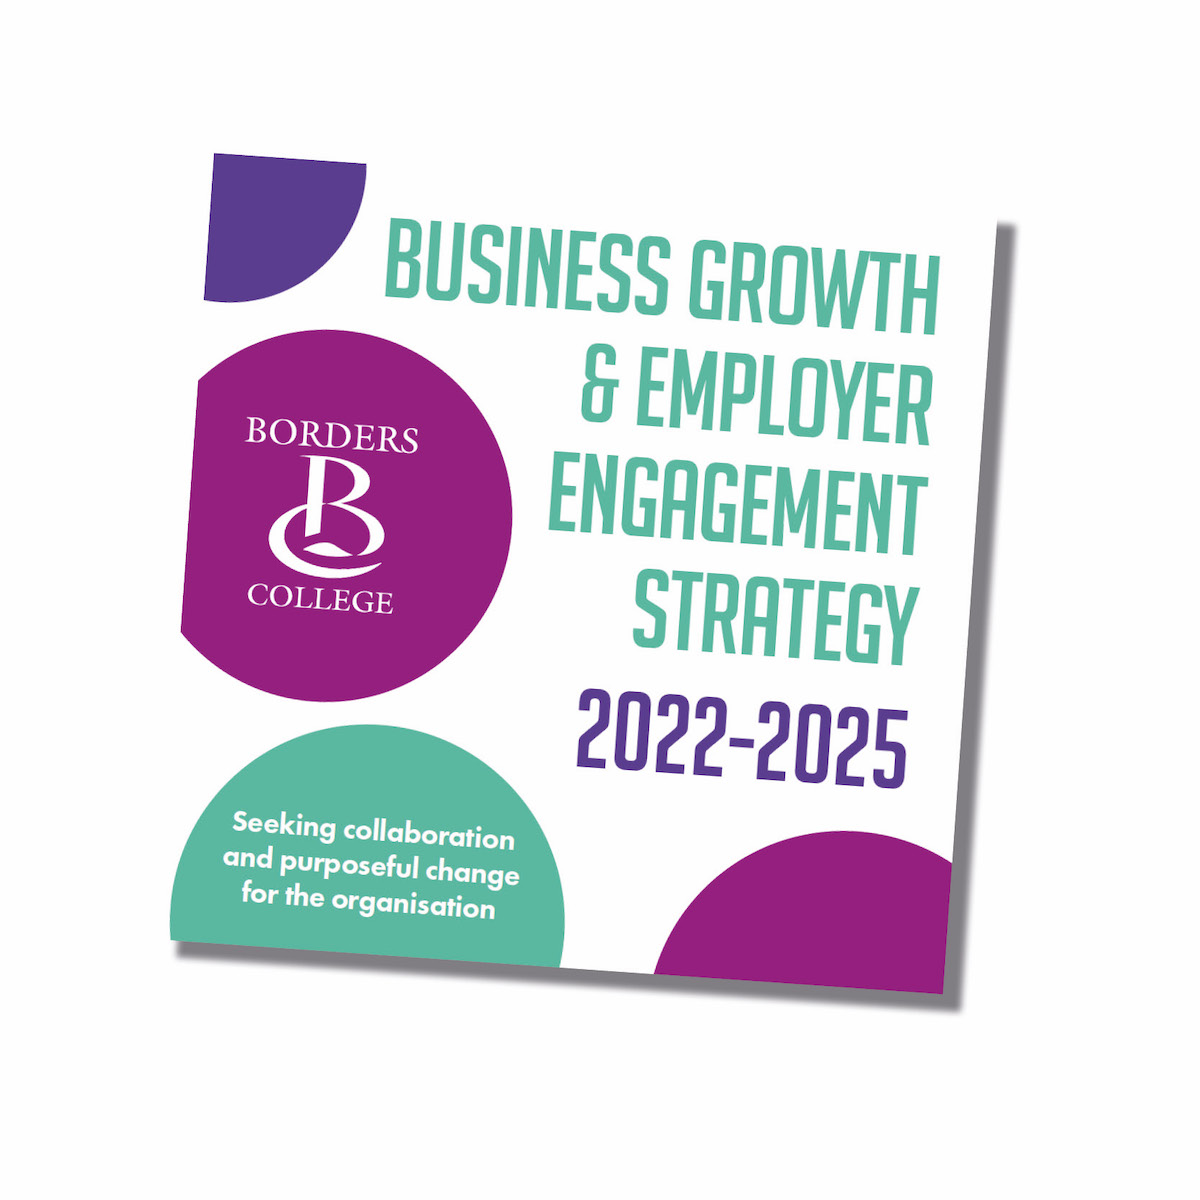 Business Growth & Employer Engagement Strategy Graphic